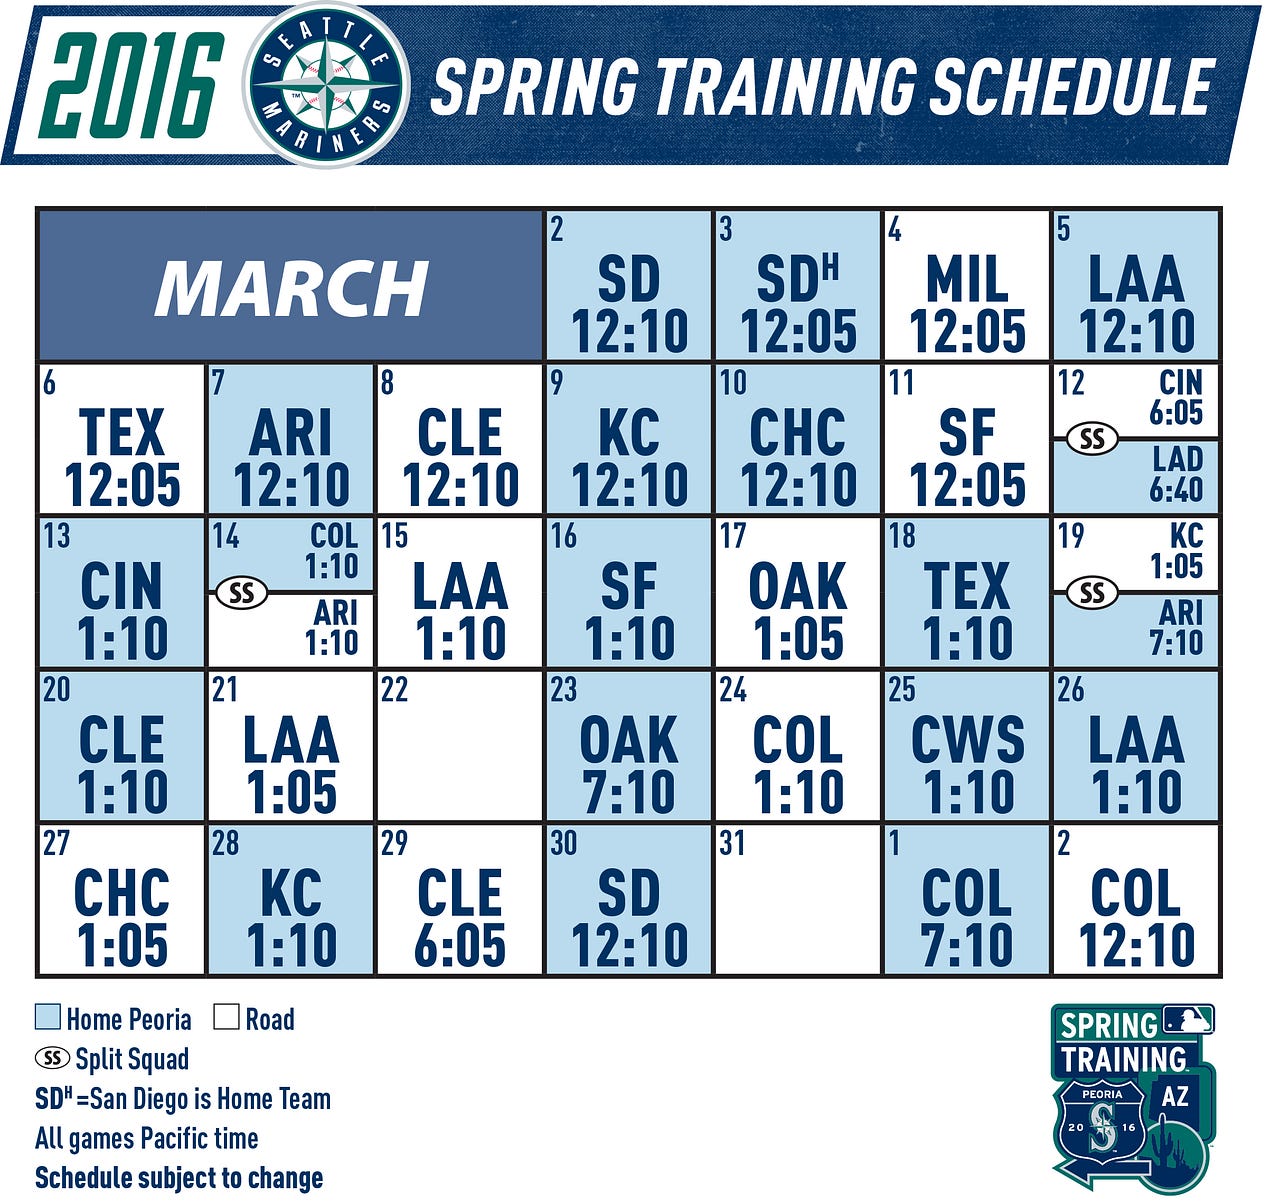 Mariners Announce Spring Training Schedule by Mariners PR From the